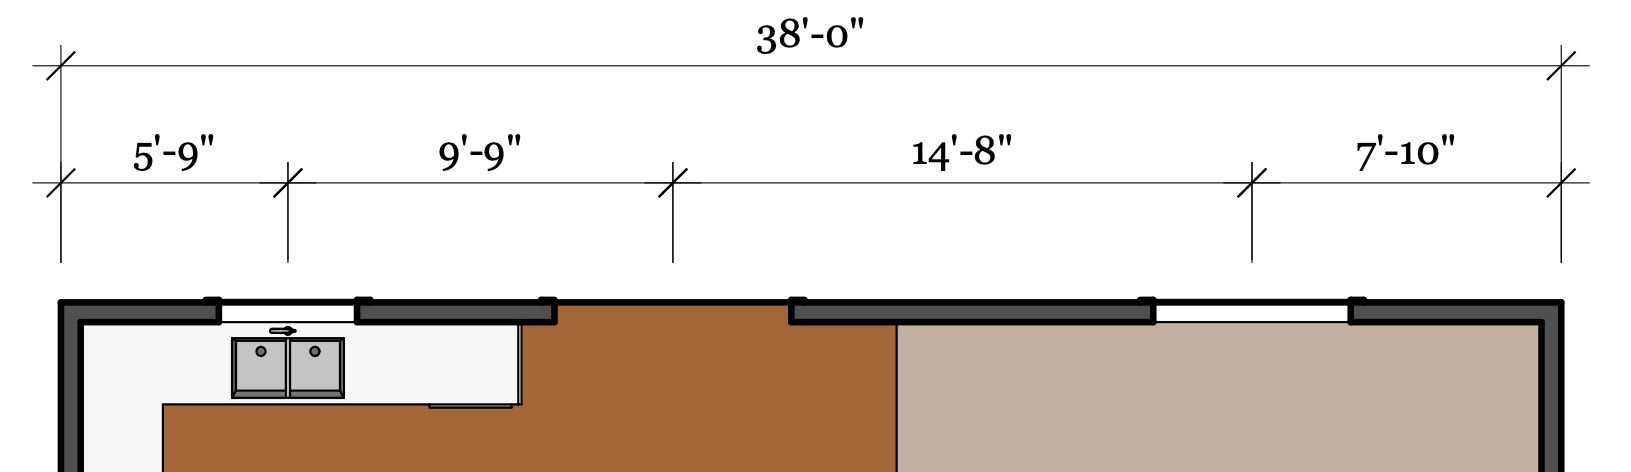 Figure 14.20 – Final dimensions along the back wall
